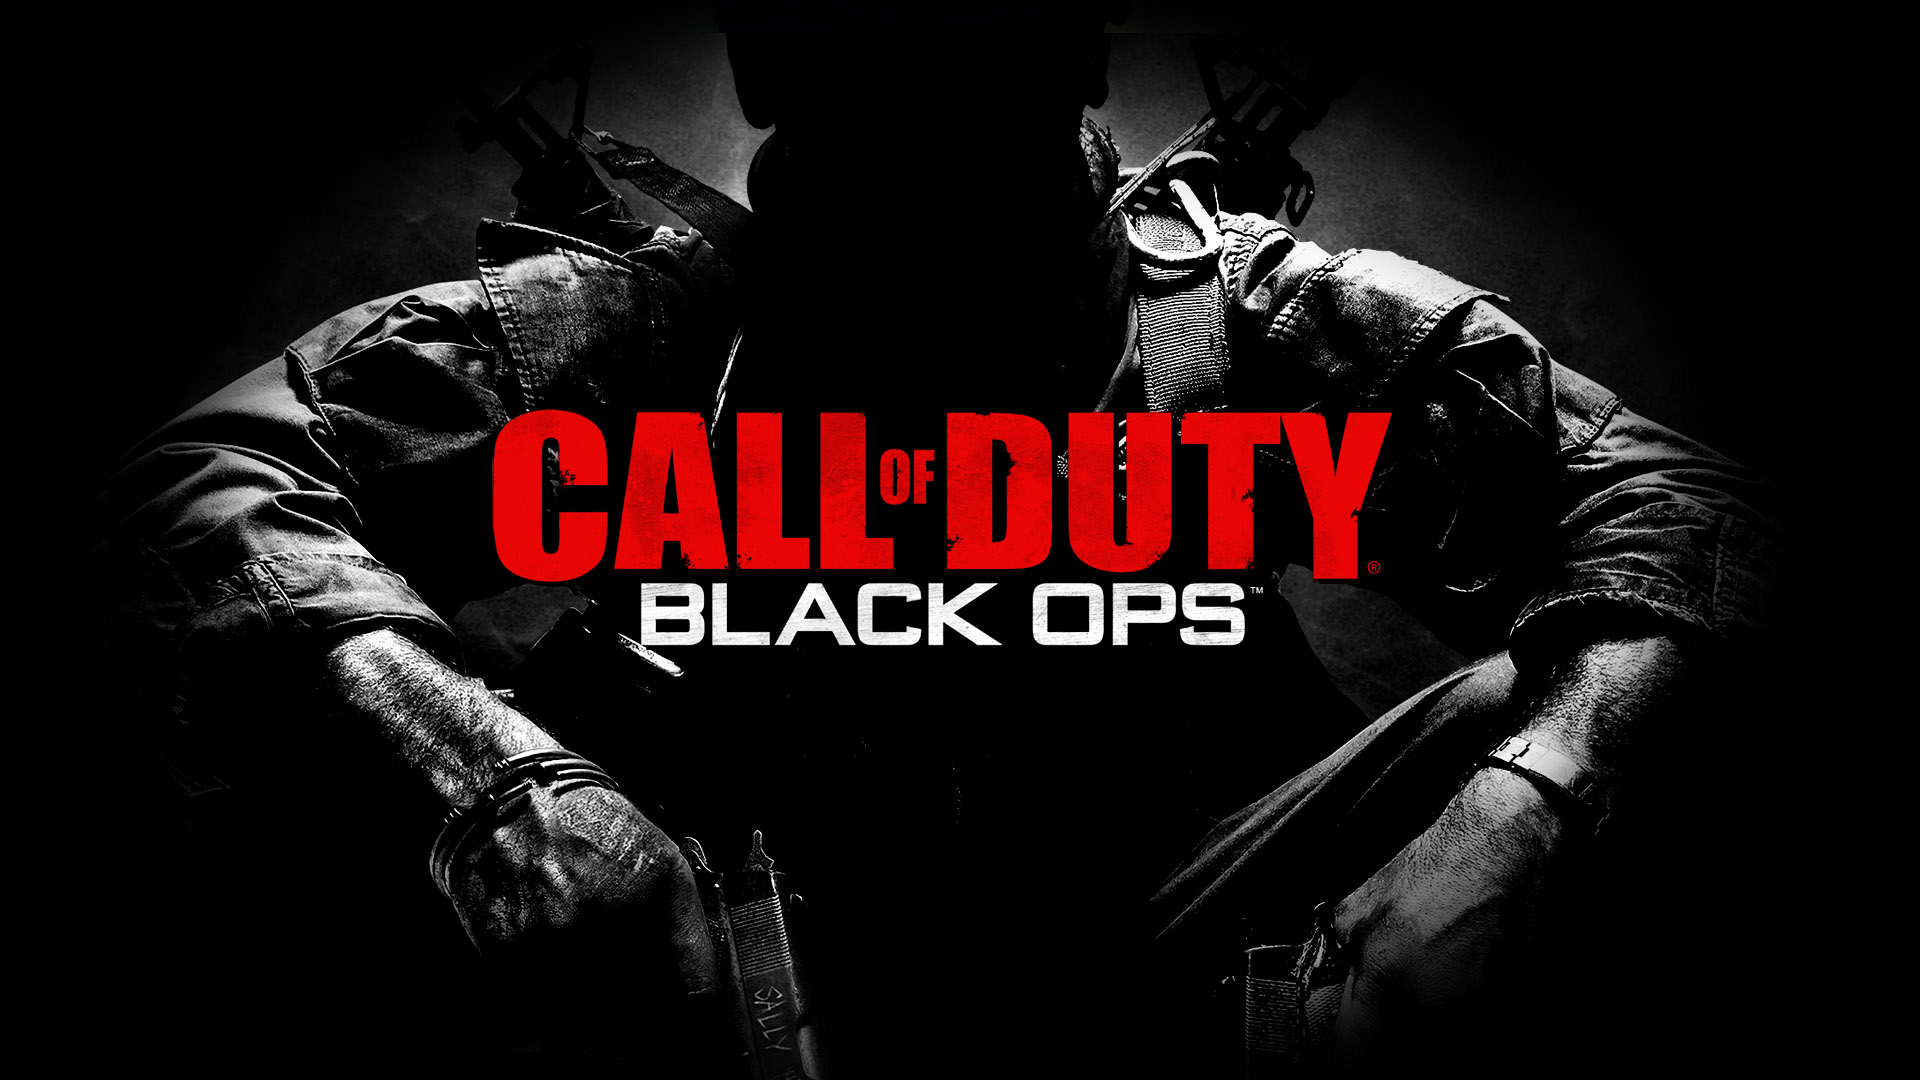 Call Of Duty Black Ops Red Label 1920x1080 HD Image Games